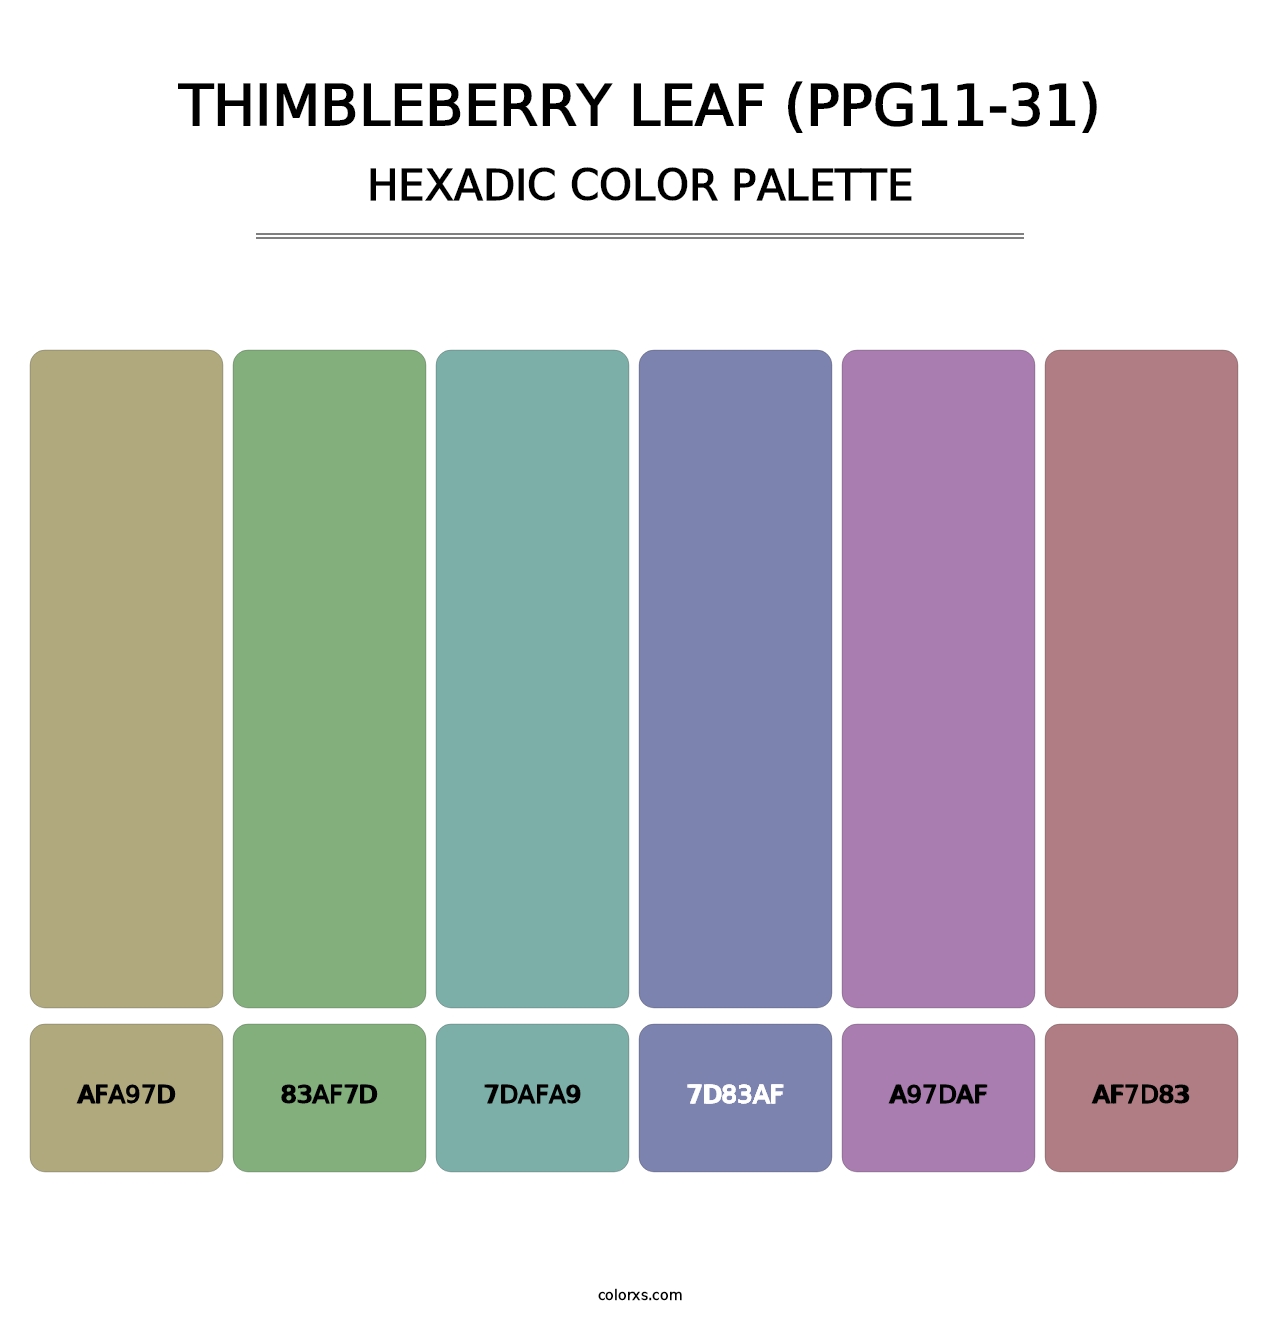 Thimbleberry Leaf (PPG11-31) - Hexadic Color Palette